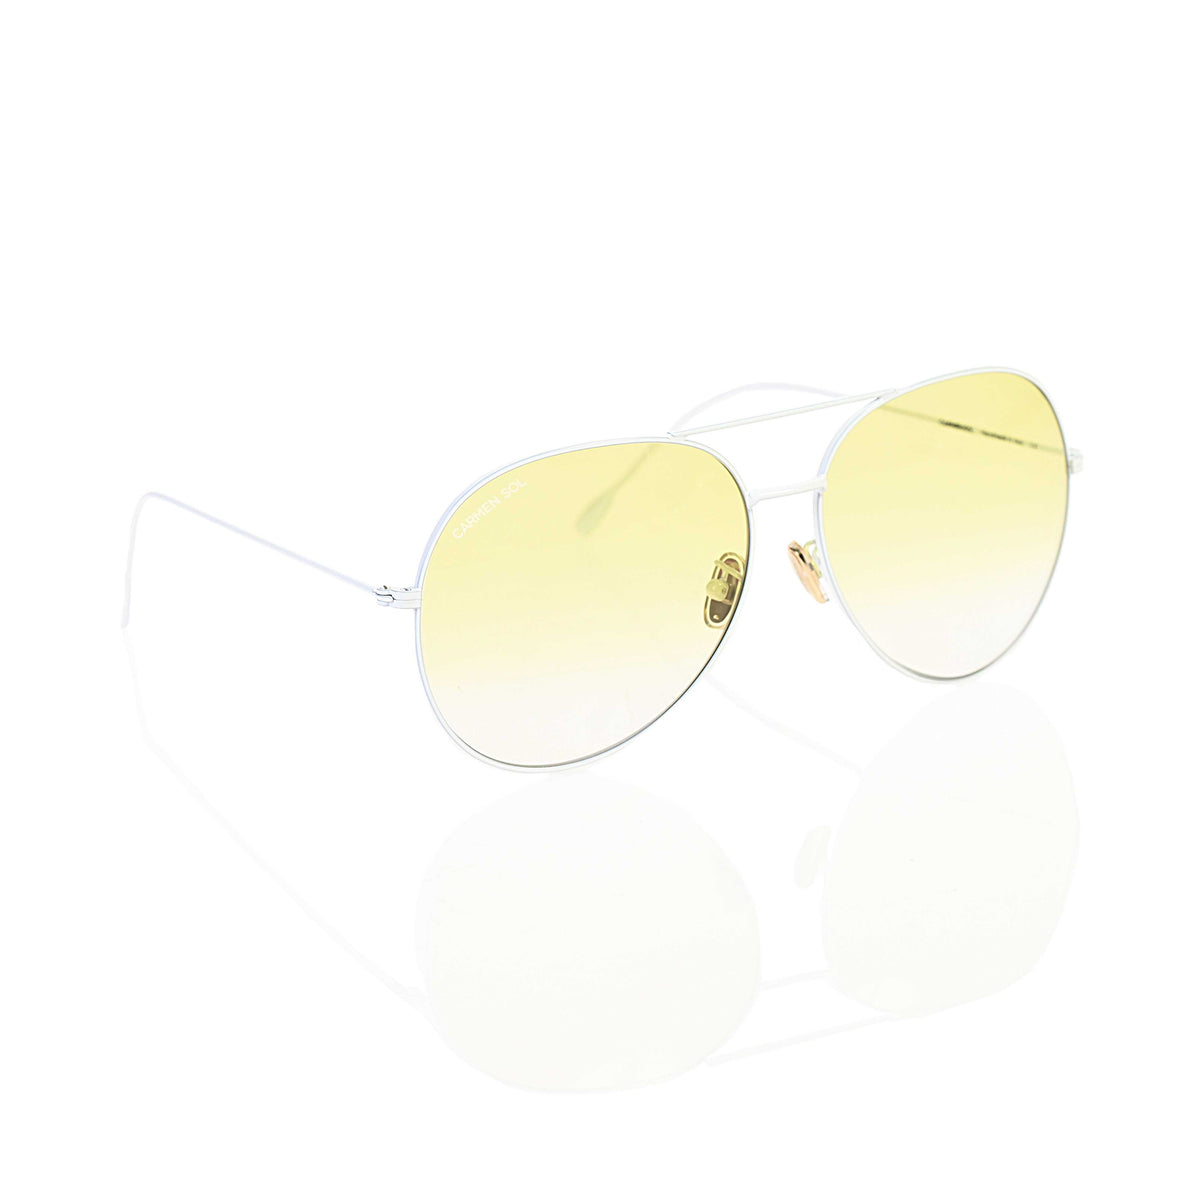 White aviator sunglasses for women from carmen sol featuring on-trend colors and finishes